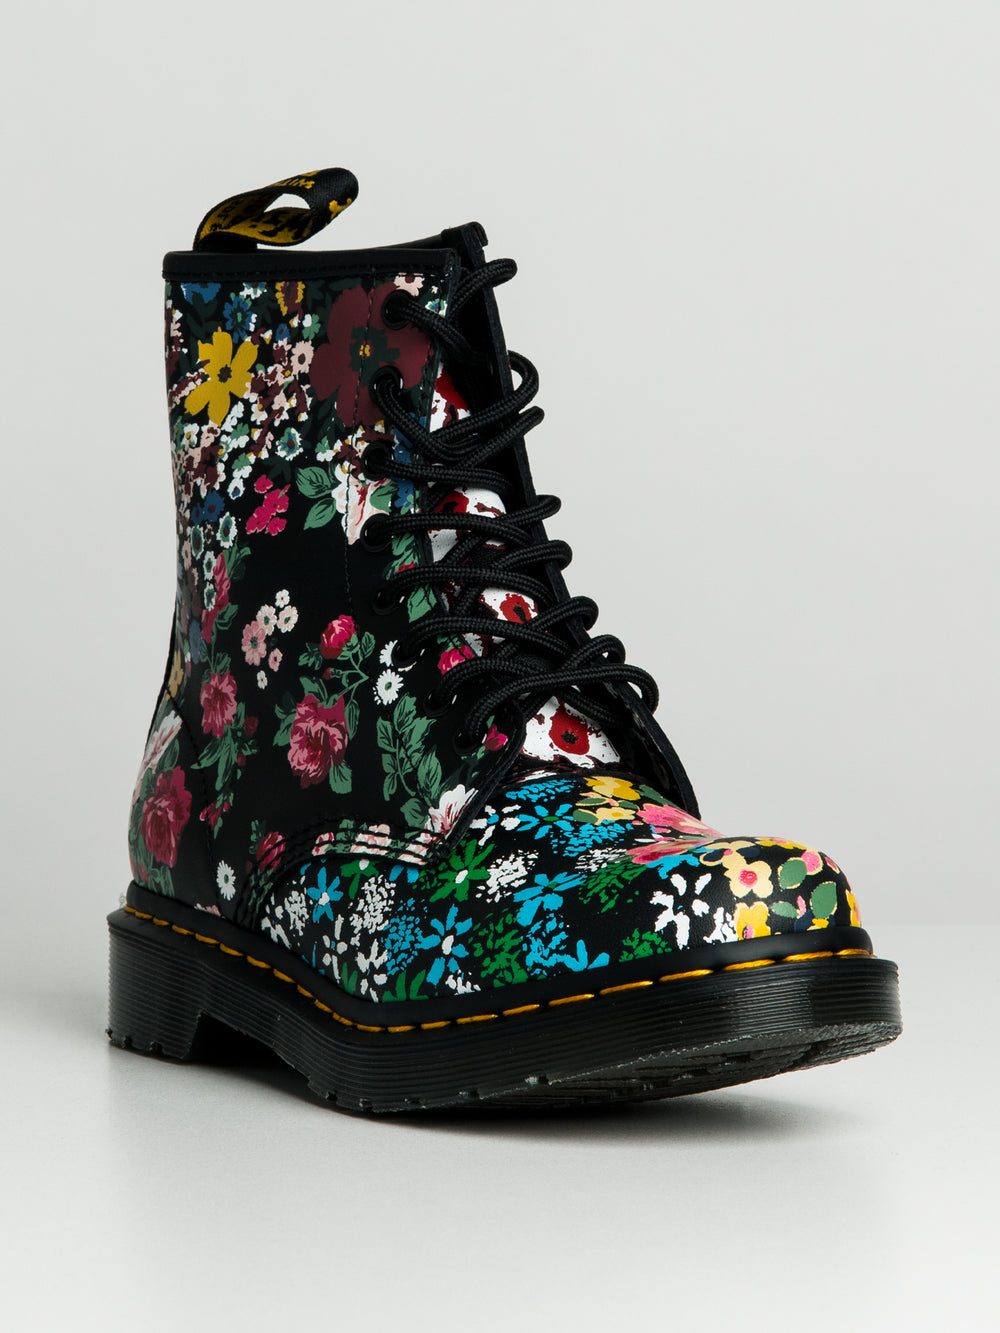 WOMENS DR MARTENS 1460 FLORAL MASH UP BACKHAND BOOT - CLEARANCE